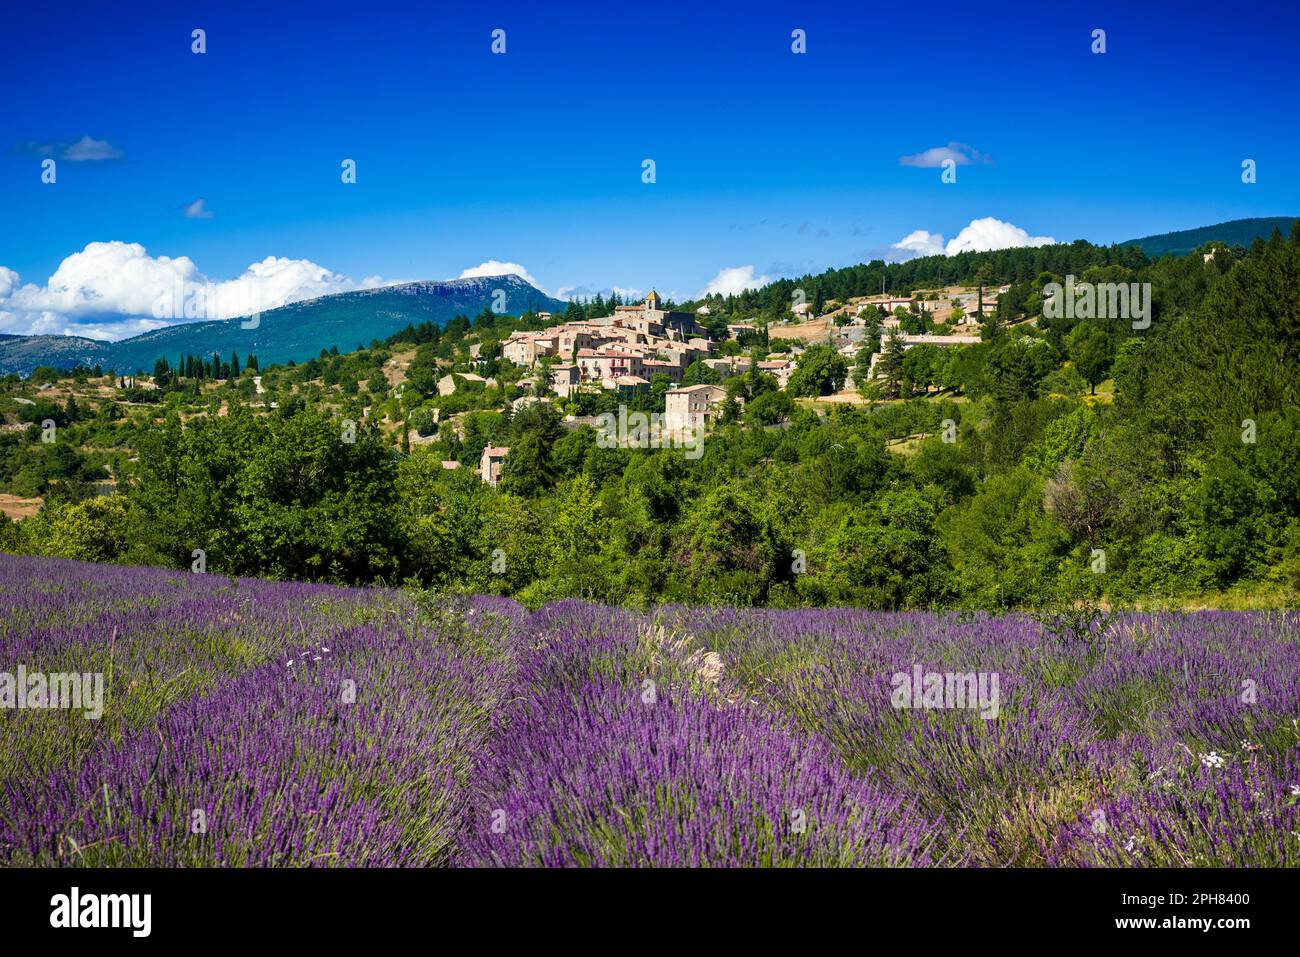 Aurel a typical provencal village in south of France Stock Photo